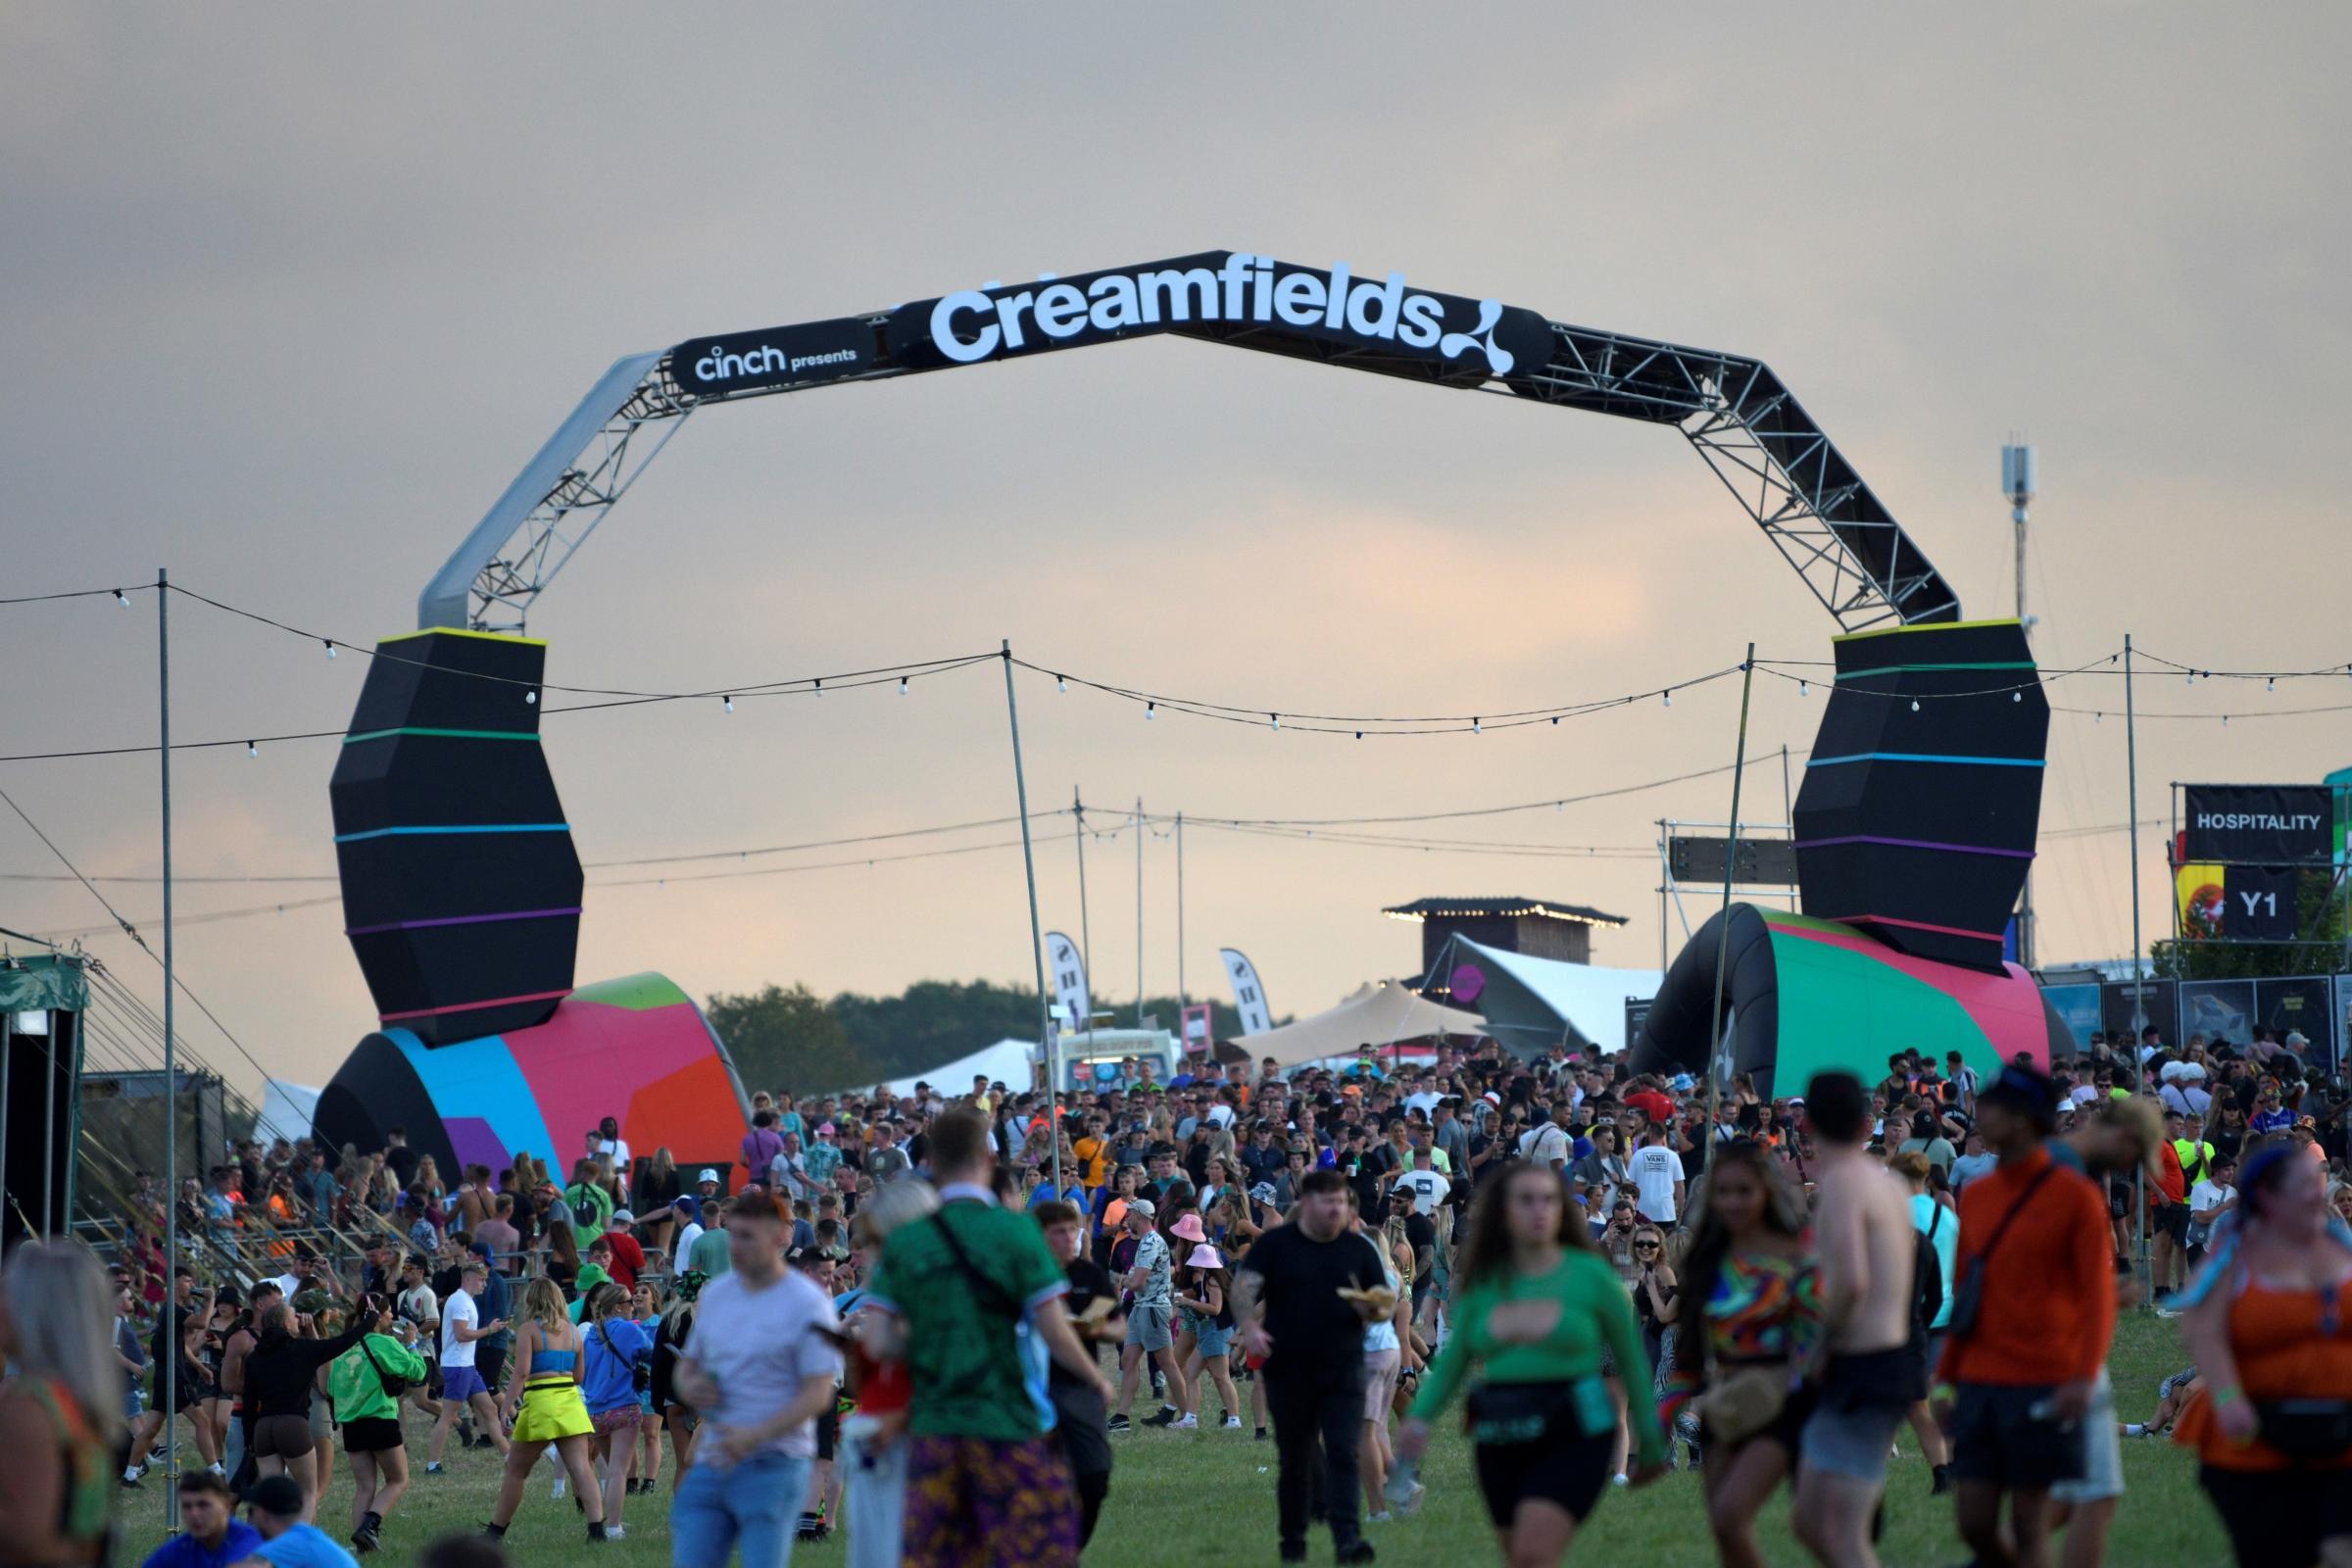 Creamfields music festival is staged in Daresbury